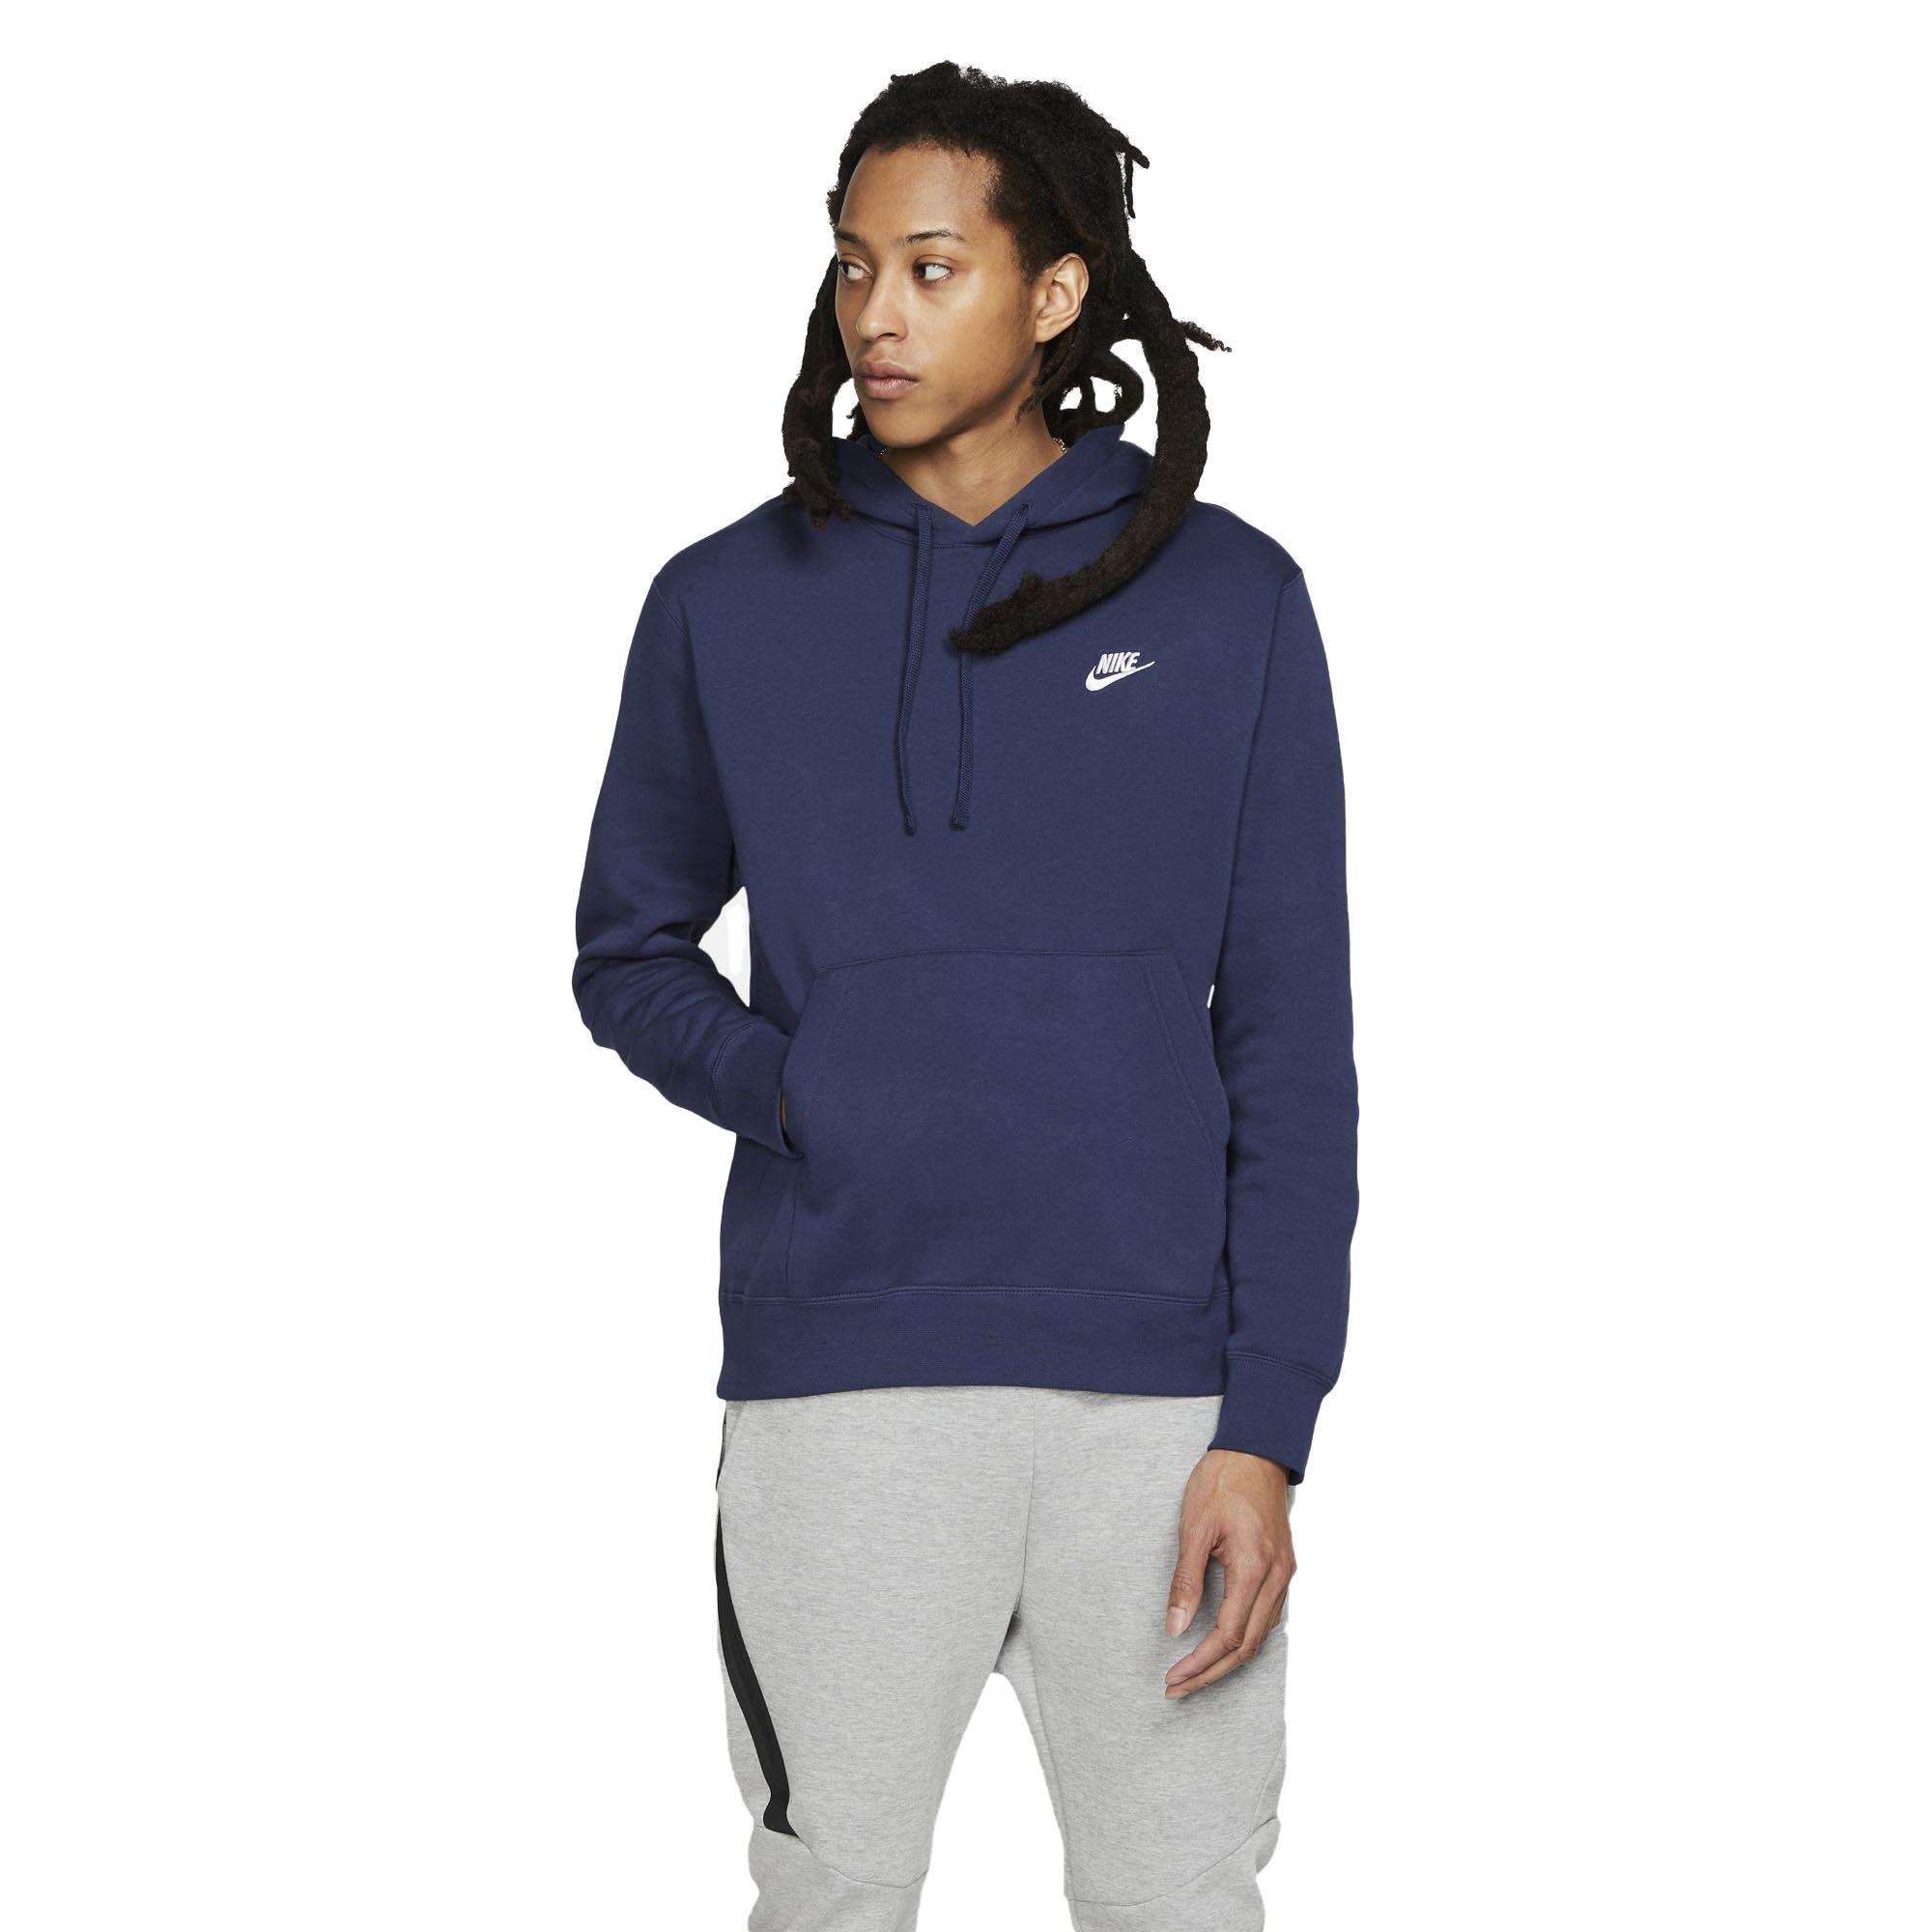  Nike Men's Nsw Club Pullover Hoodie Jersey, Midnight  Navy/(White), Small : Clothing, Shoes & Jewelry